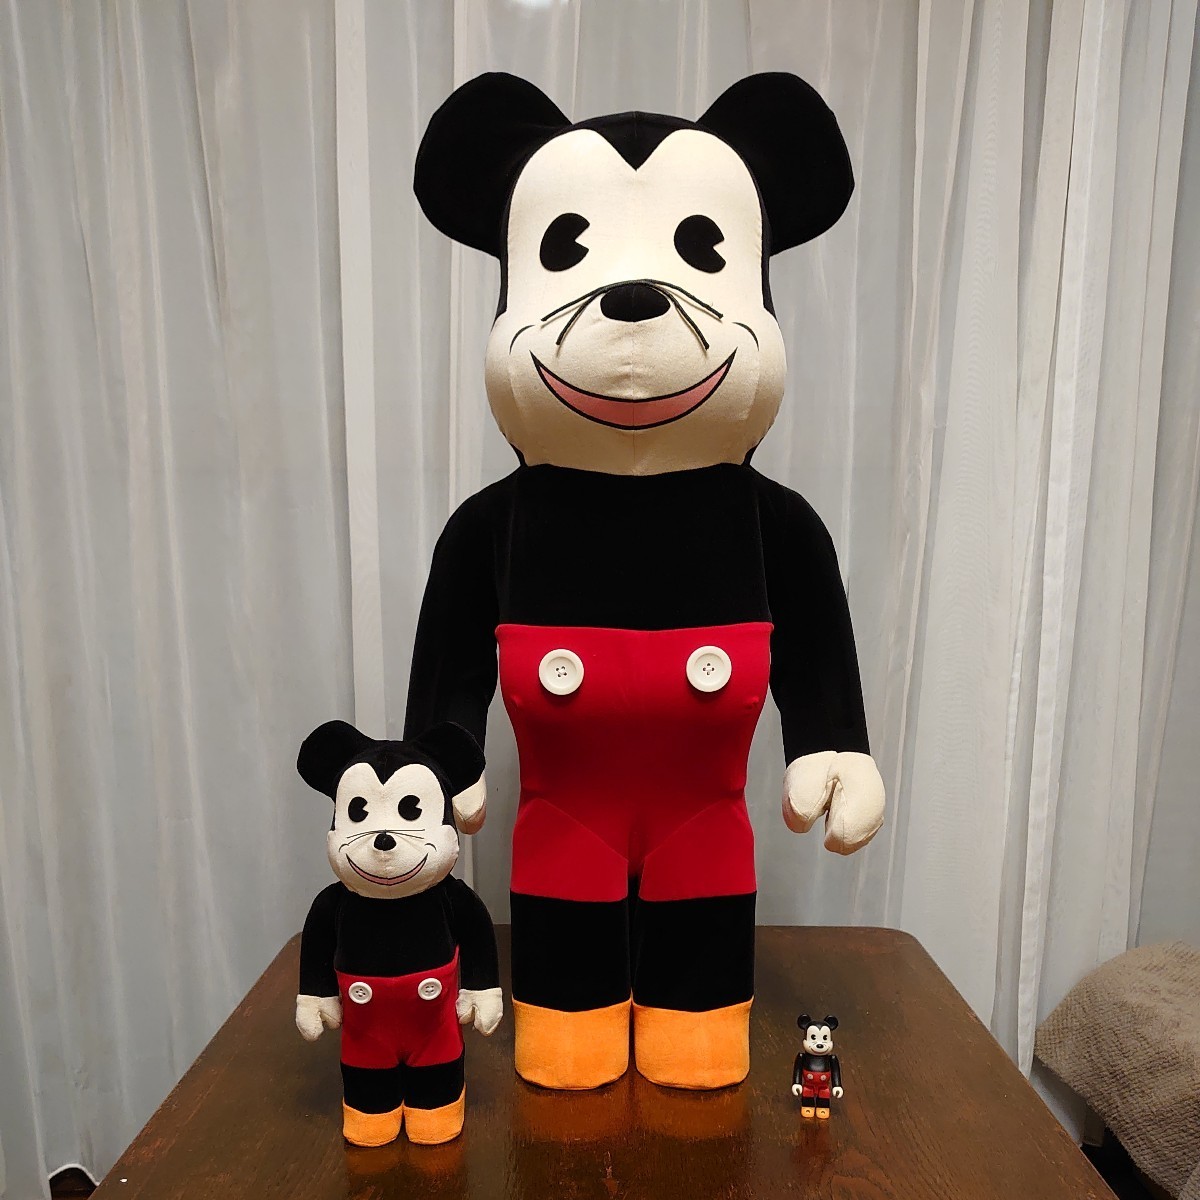 BWWT BE@RBRICK WORLD WIDE TOUR DISNEY MICKEY MOUSE 1000% ＋400％ ＋100％セット ベアブリック ミッキーマウス メディコムトイ 箱なし